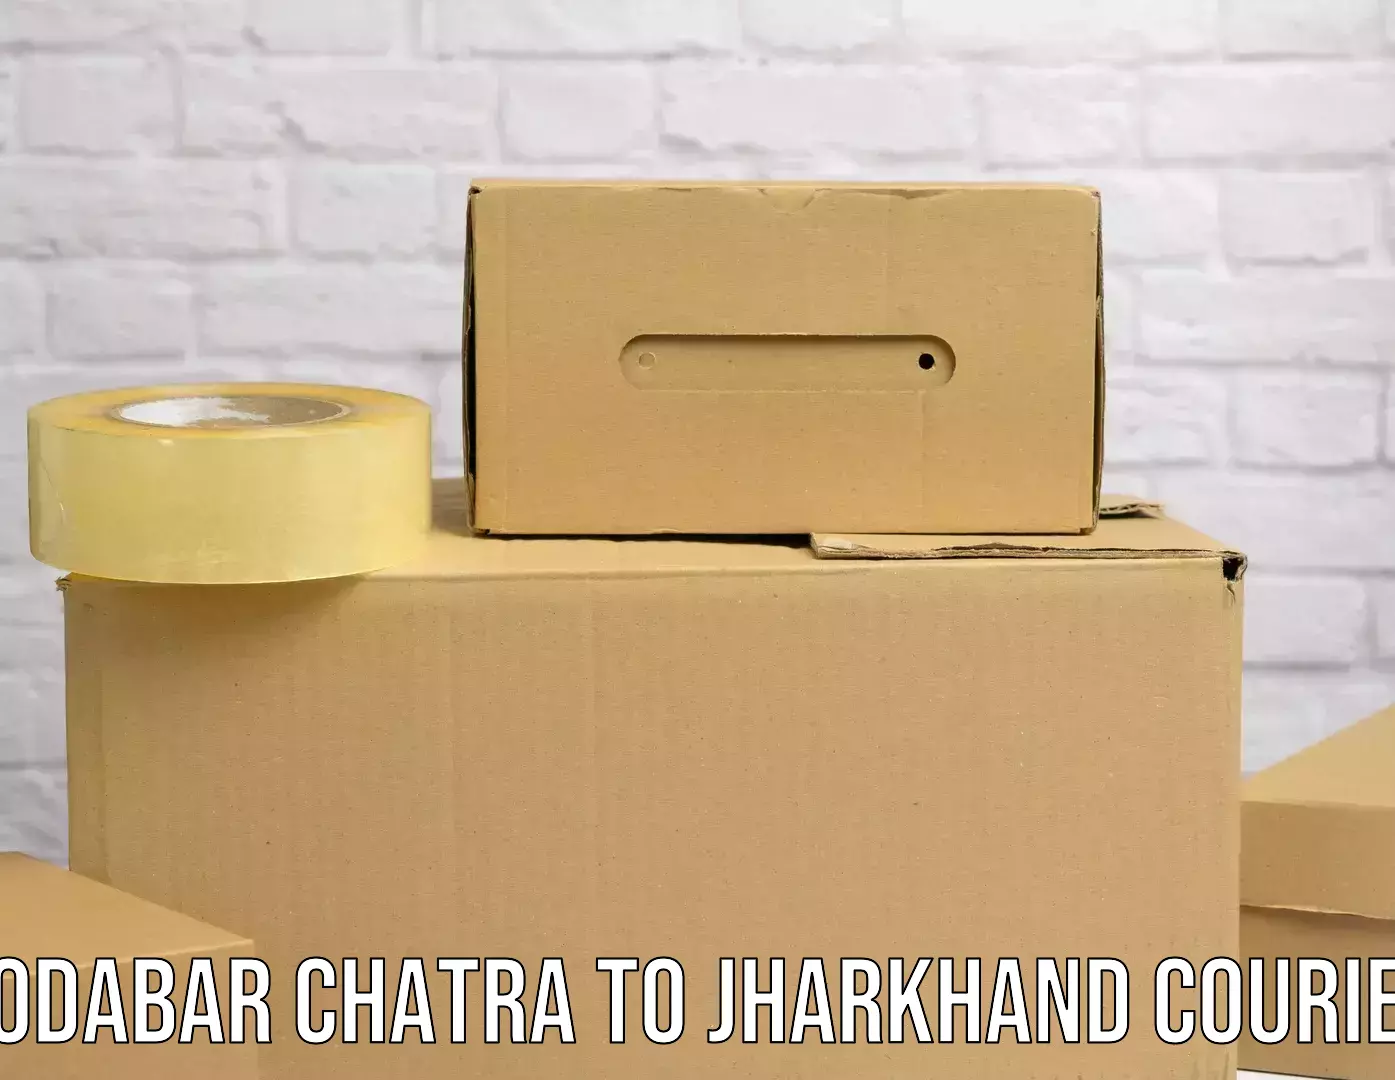 Scheduled delivery Godabar Chatra to Jharkhand